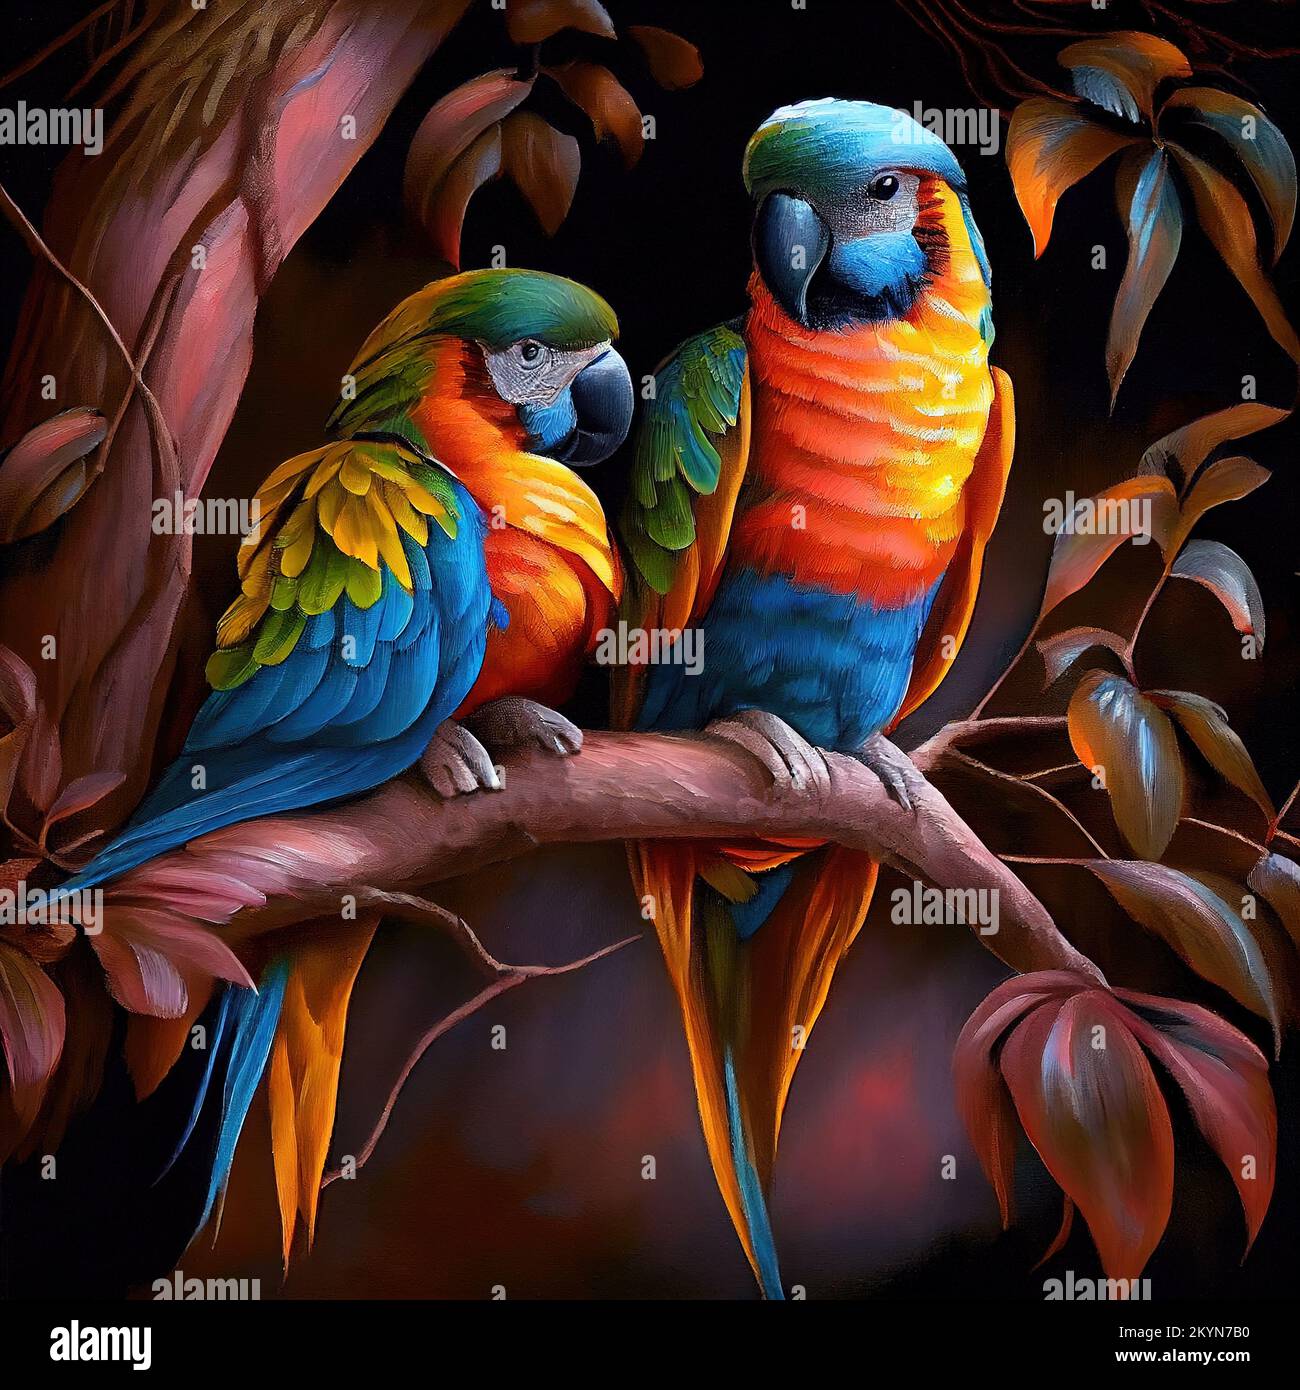 How to draw two parrots in love by pencil sketch | Two parrots in love |  ArtsQueen - YouTube